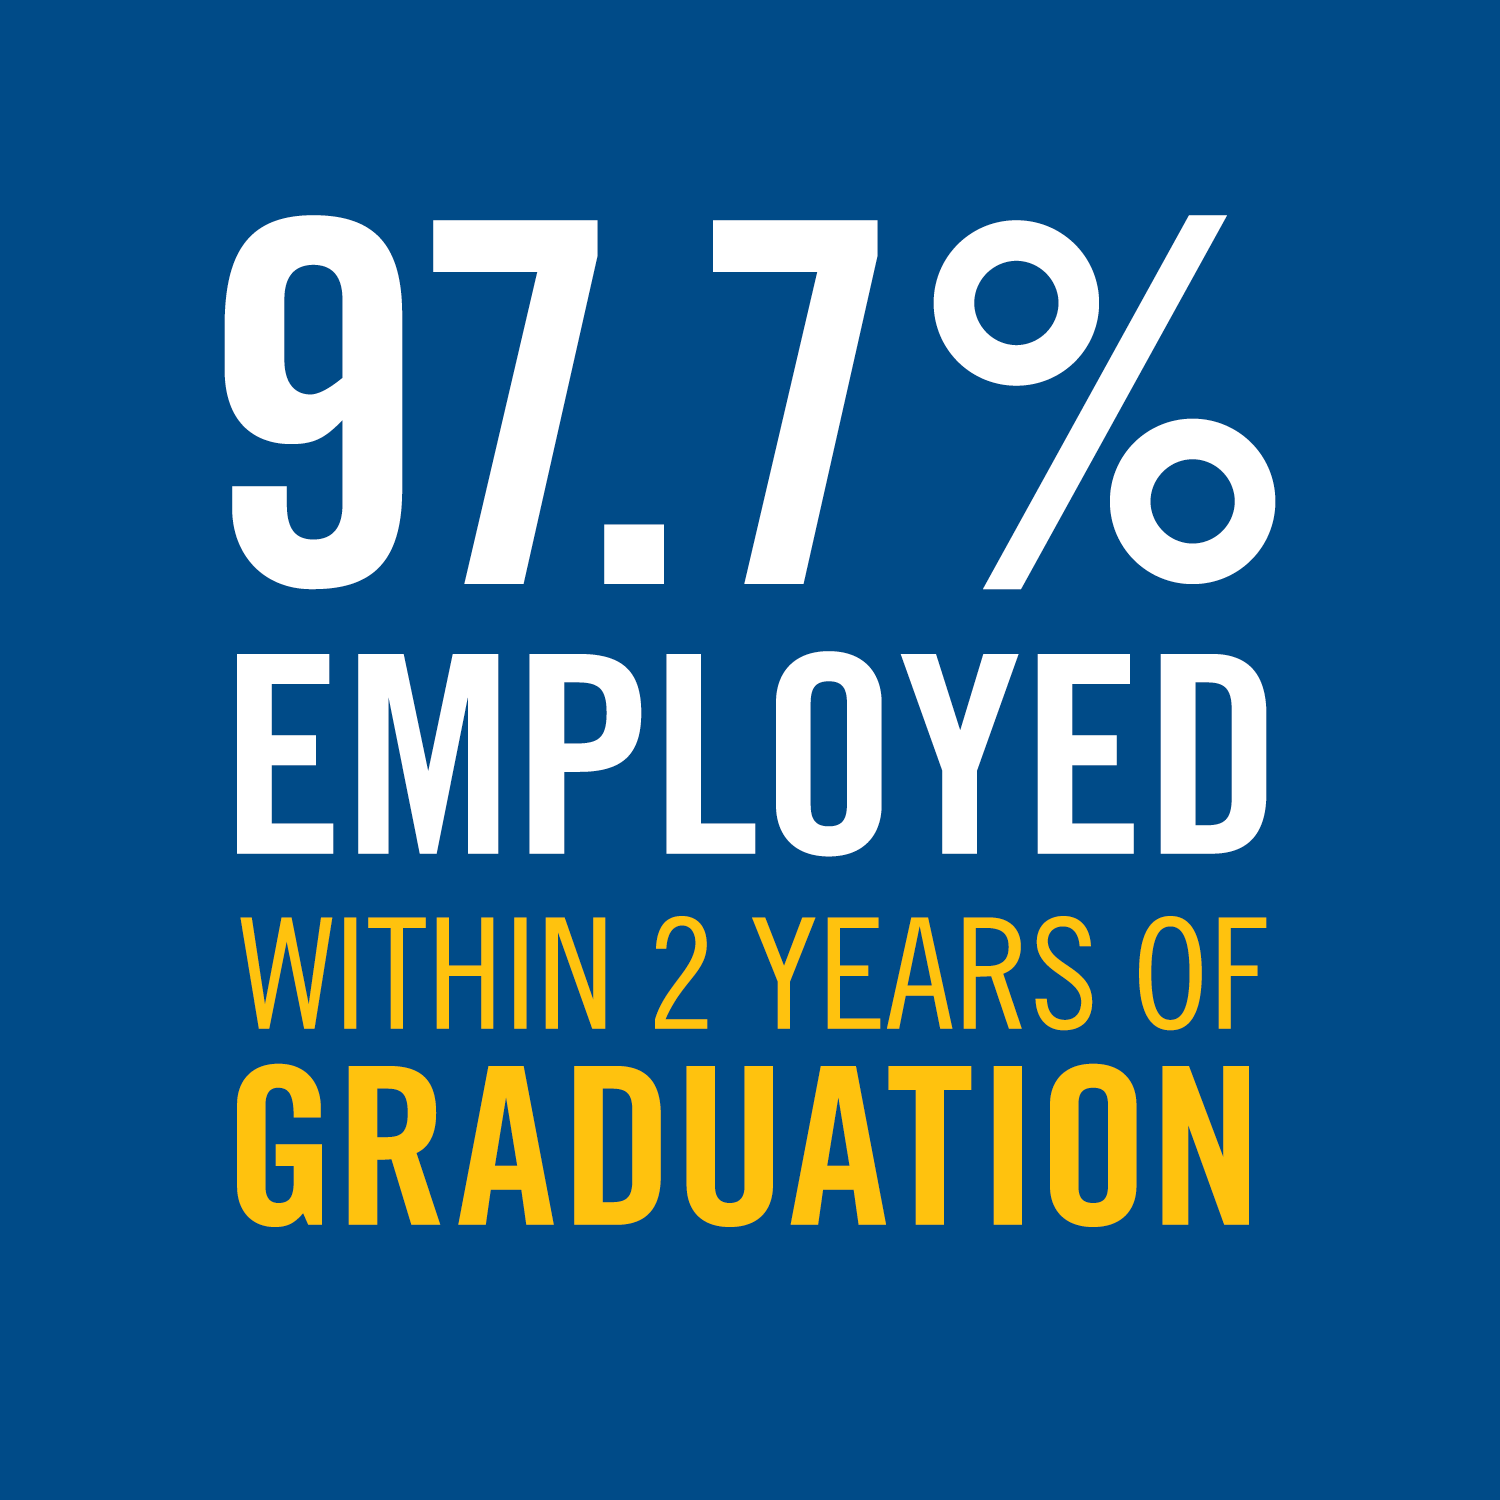 96.7% of Lakehead graduates are employed within two years of graduation